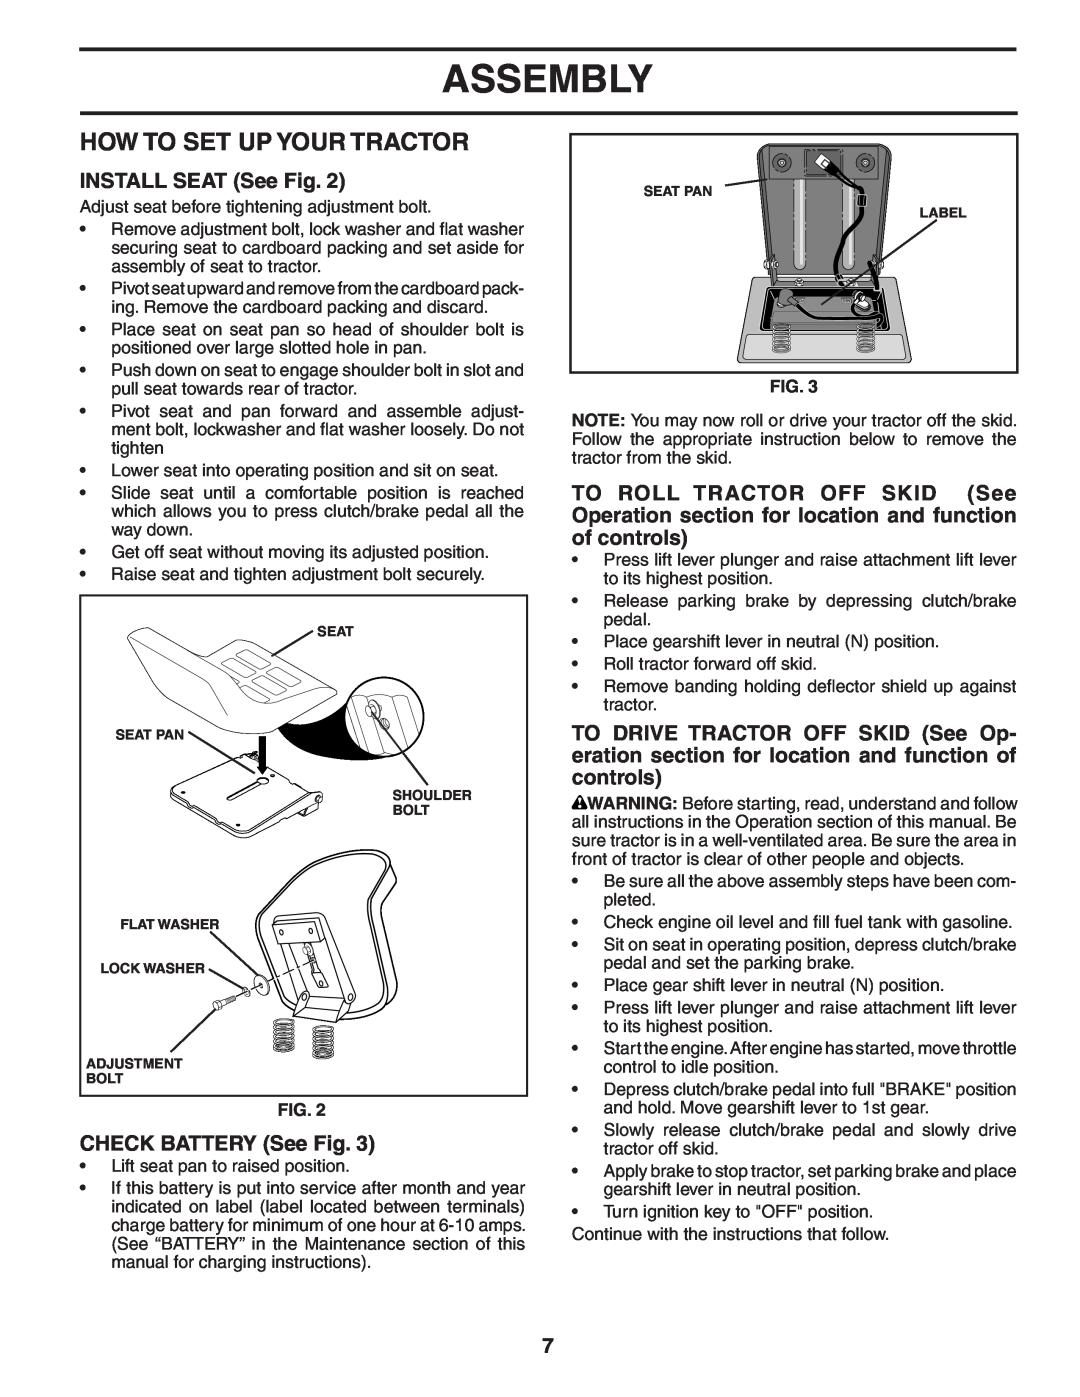 Weed Eater WE12538M manual How To Set Up Your Tractor, INSTALL SEAT See Fig, CHECK BATTERY See Fig, Assembly 